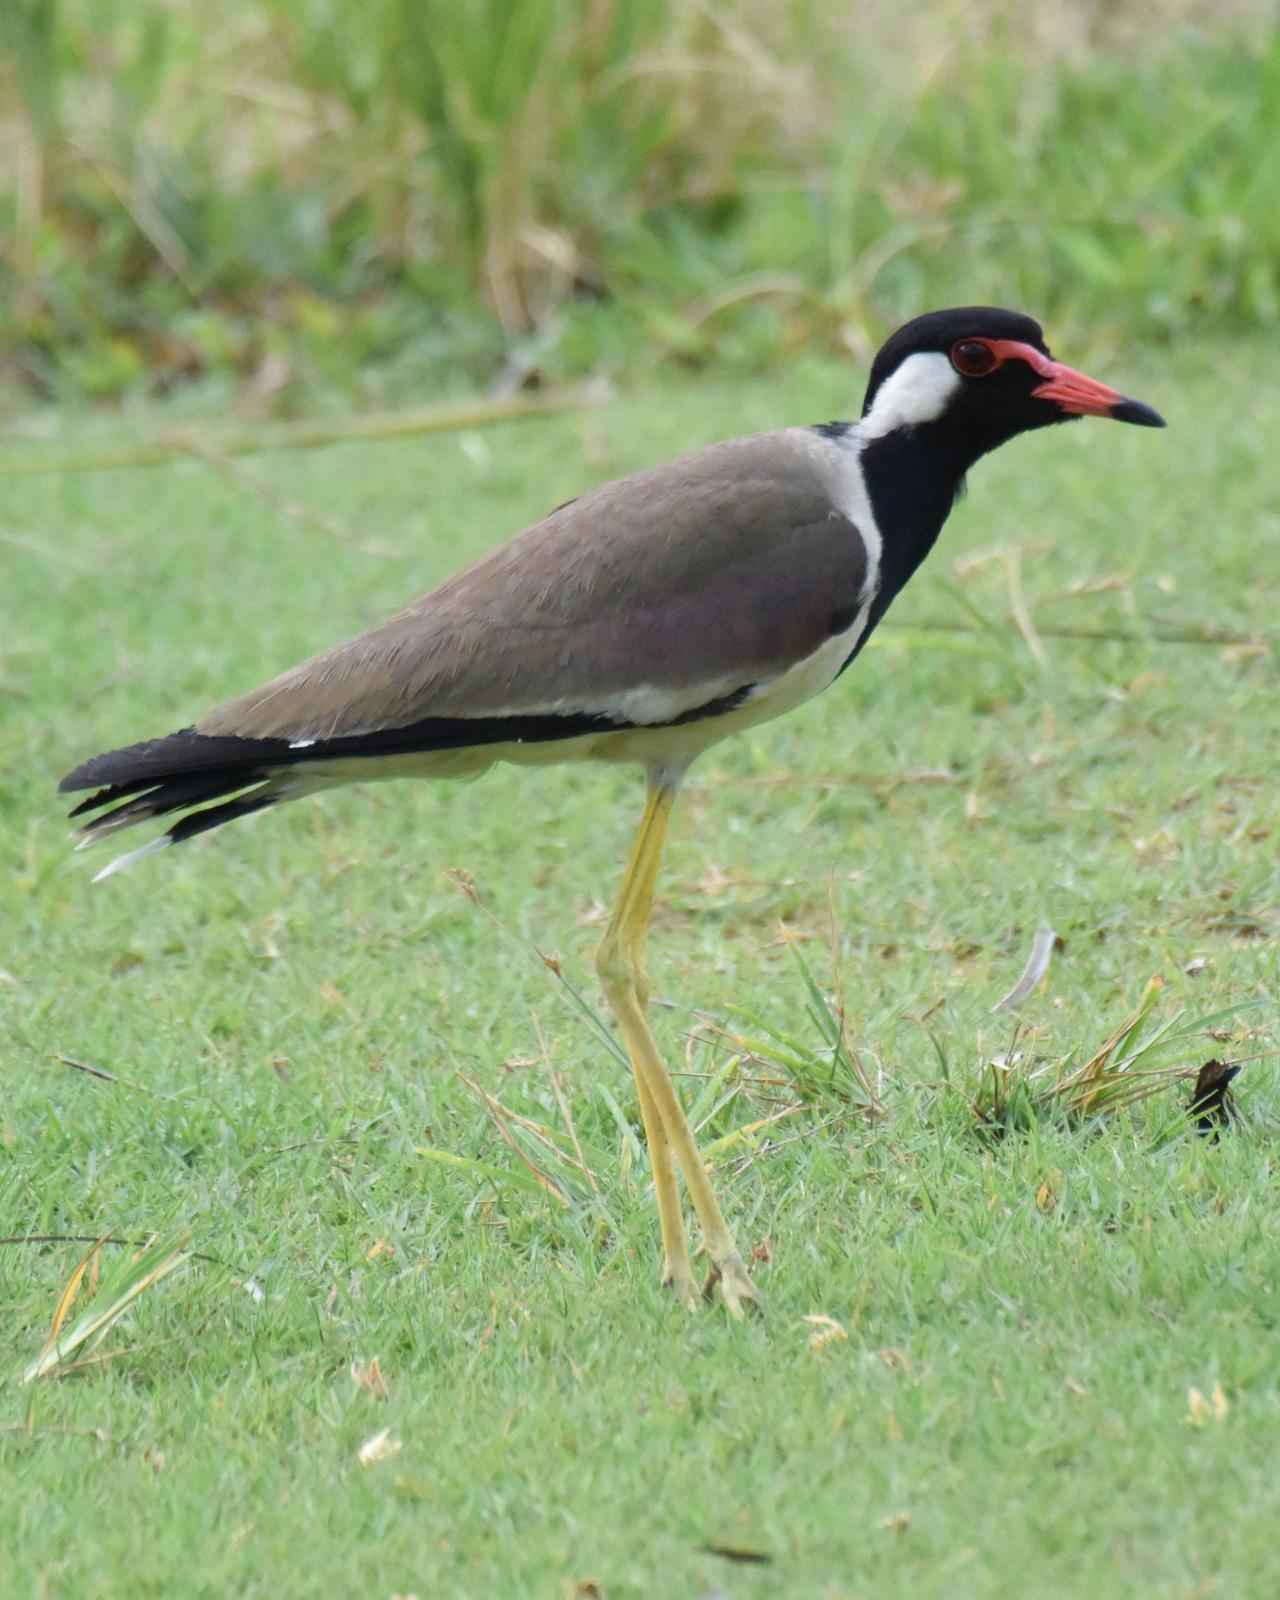 Red-wattled Lapwing Photo by Steve Percival